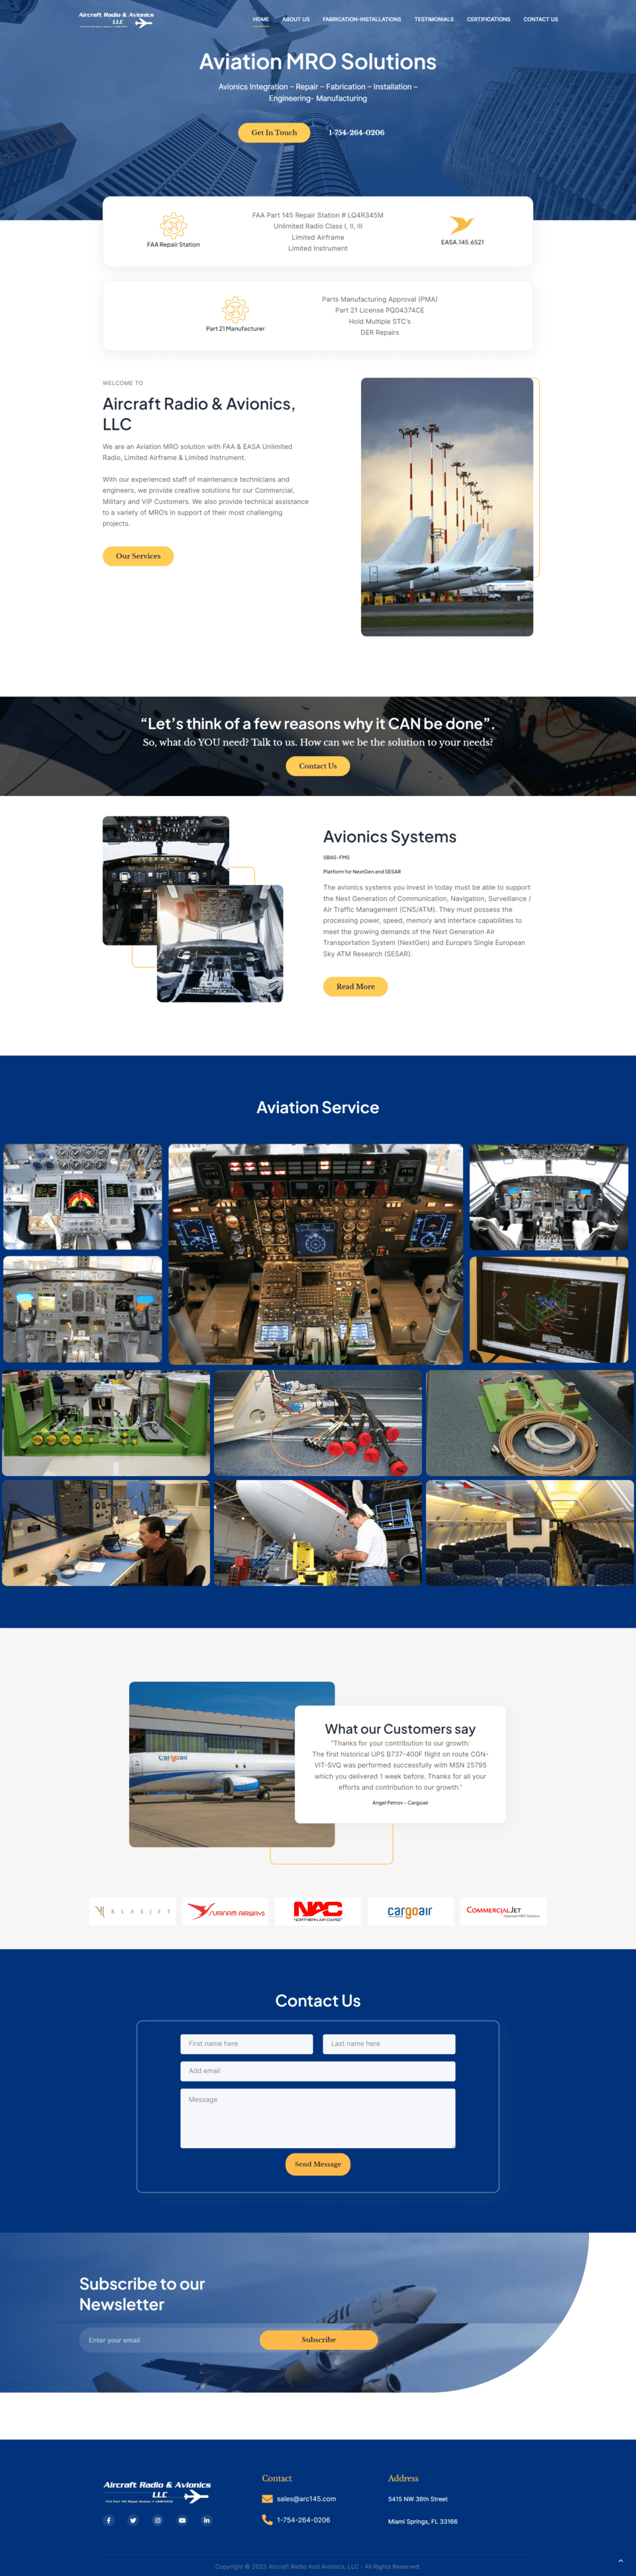 Homepage of the Aircraft Radio & Avionics website for large screen devices